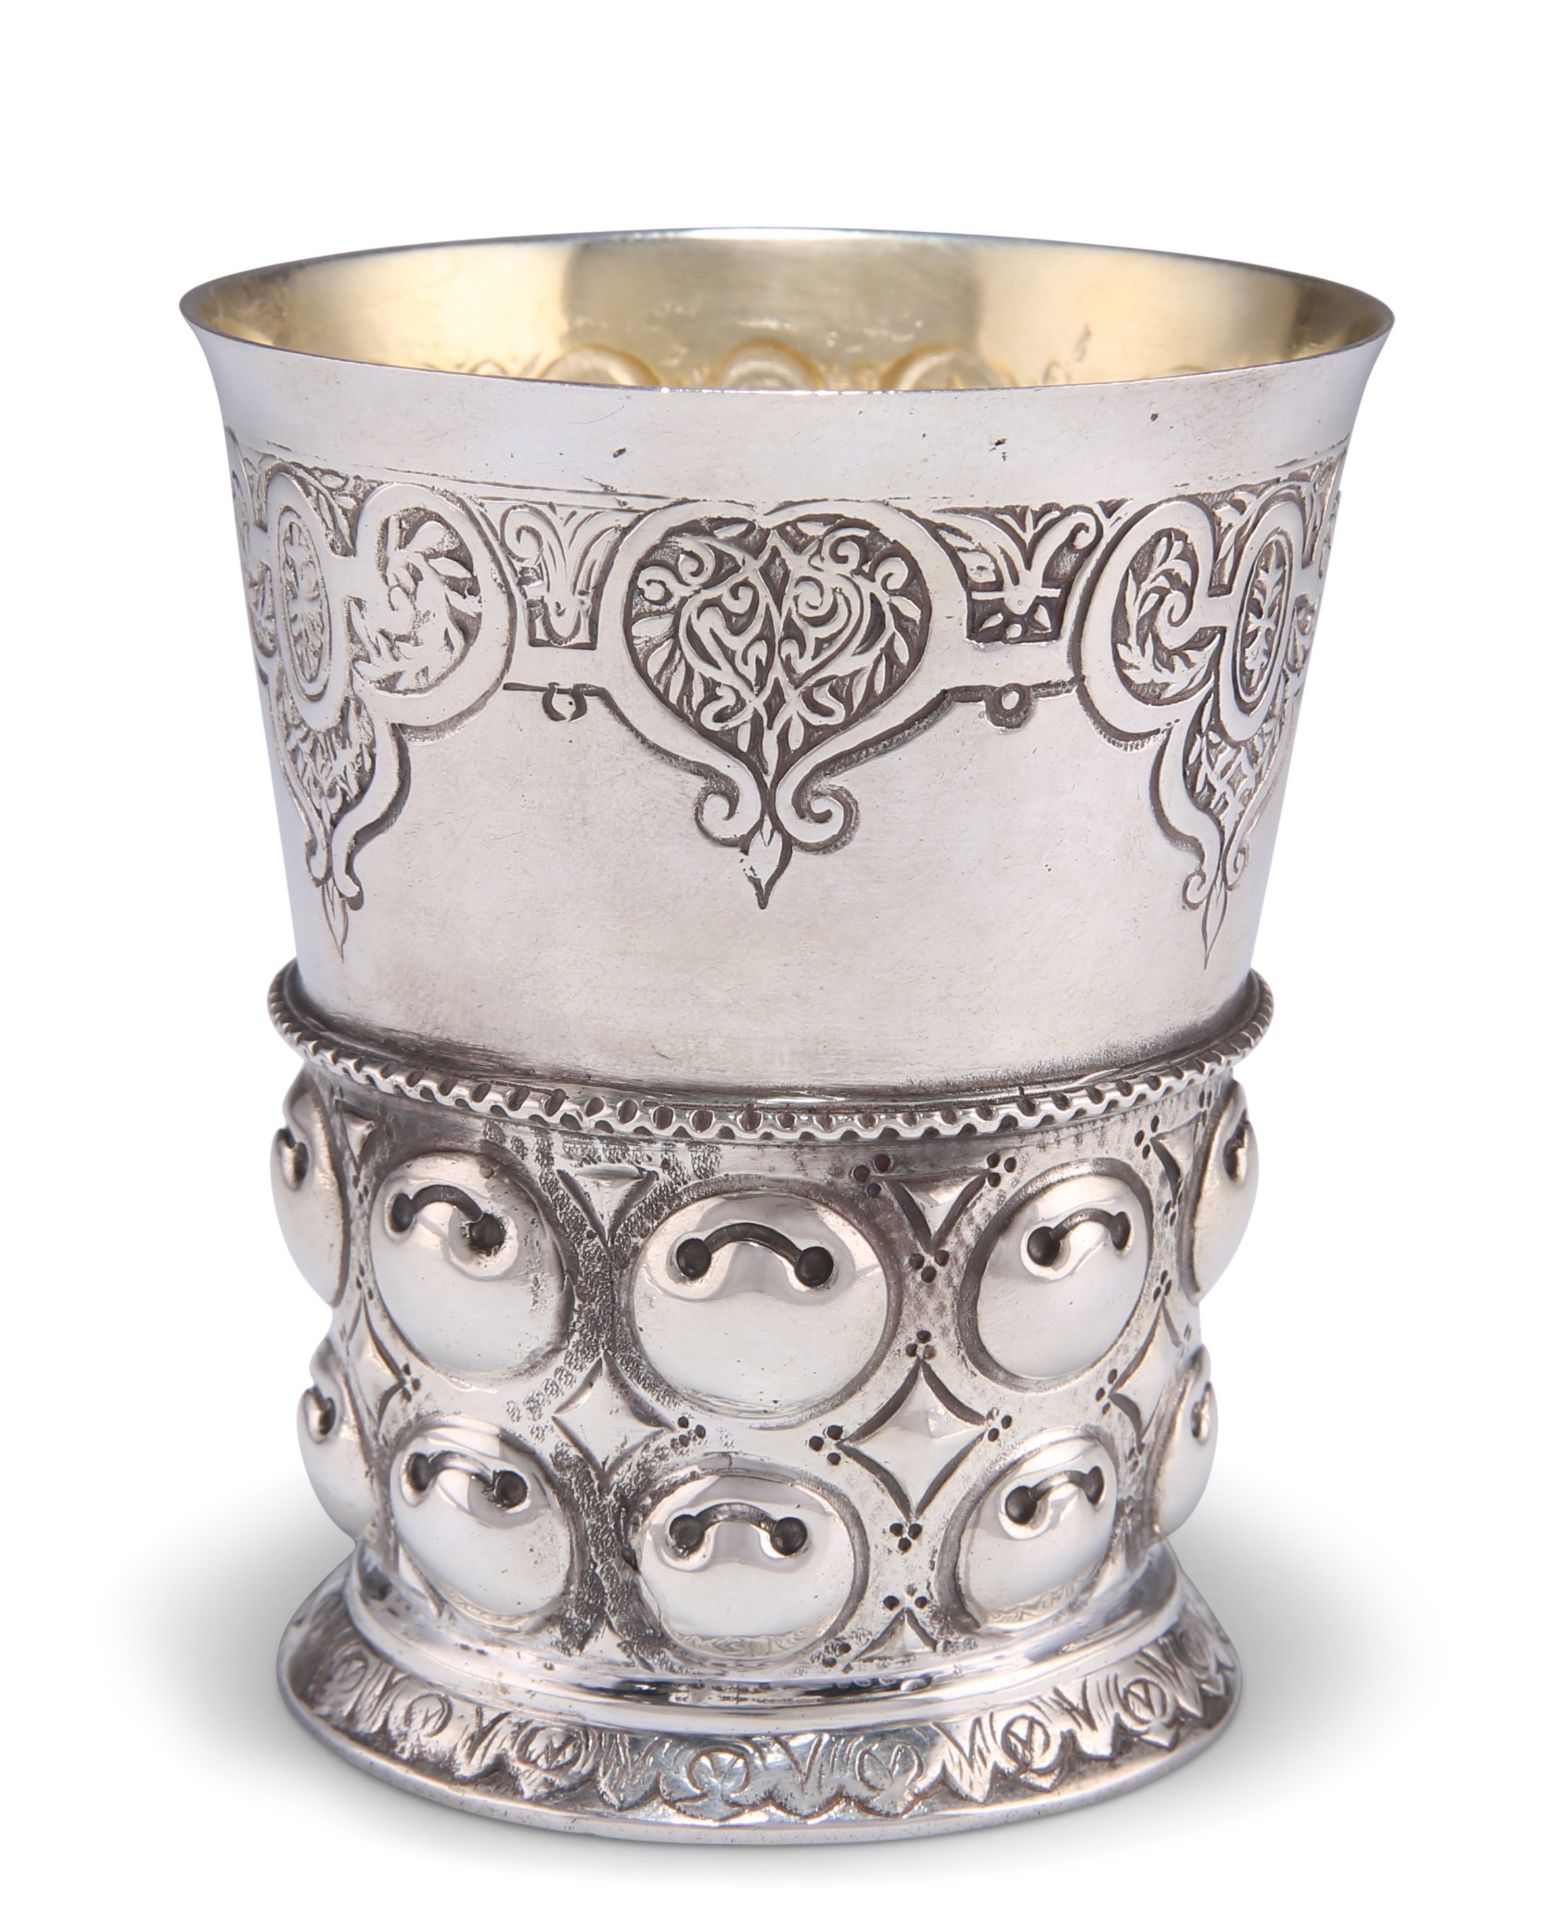 AN EARLY 18TH CENTURY GERMAN SILVER BEAKER CUP, - Image 2 of 3